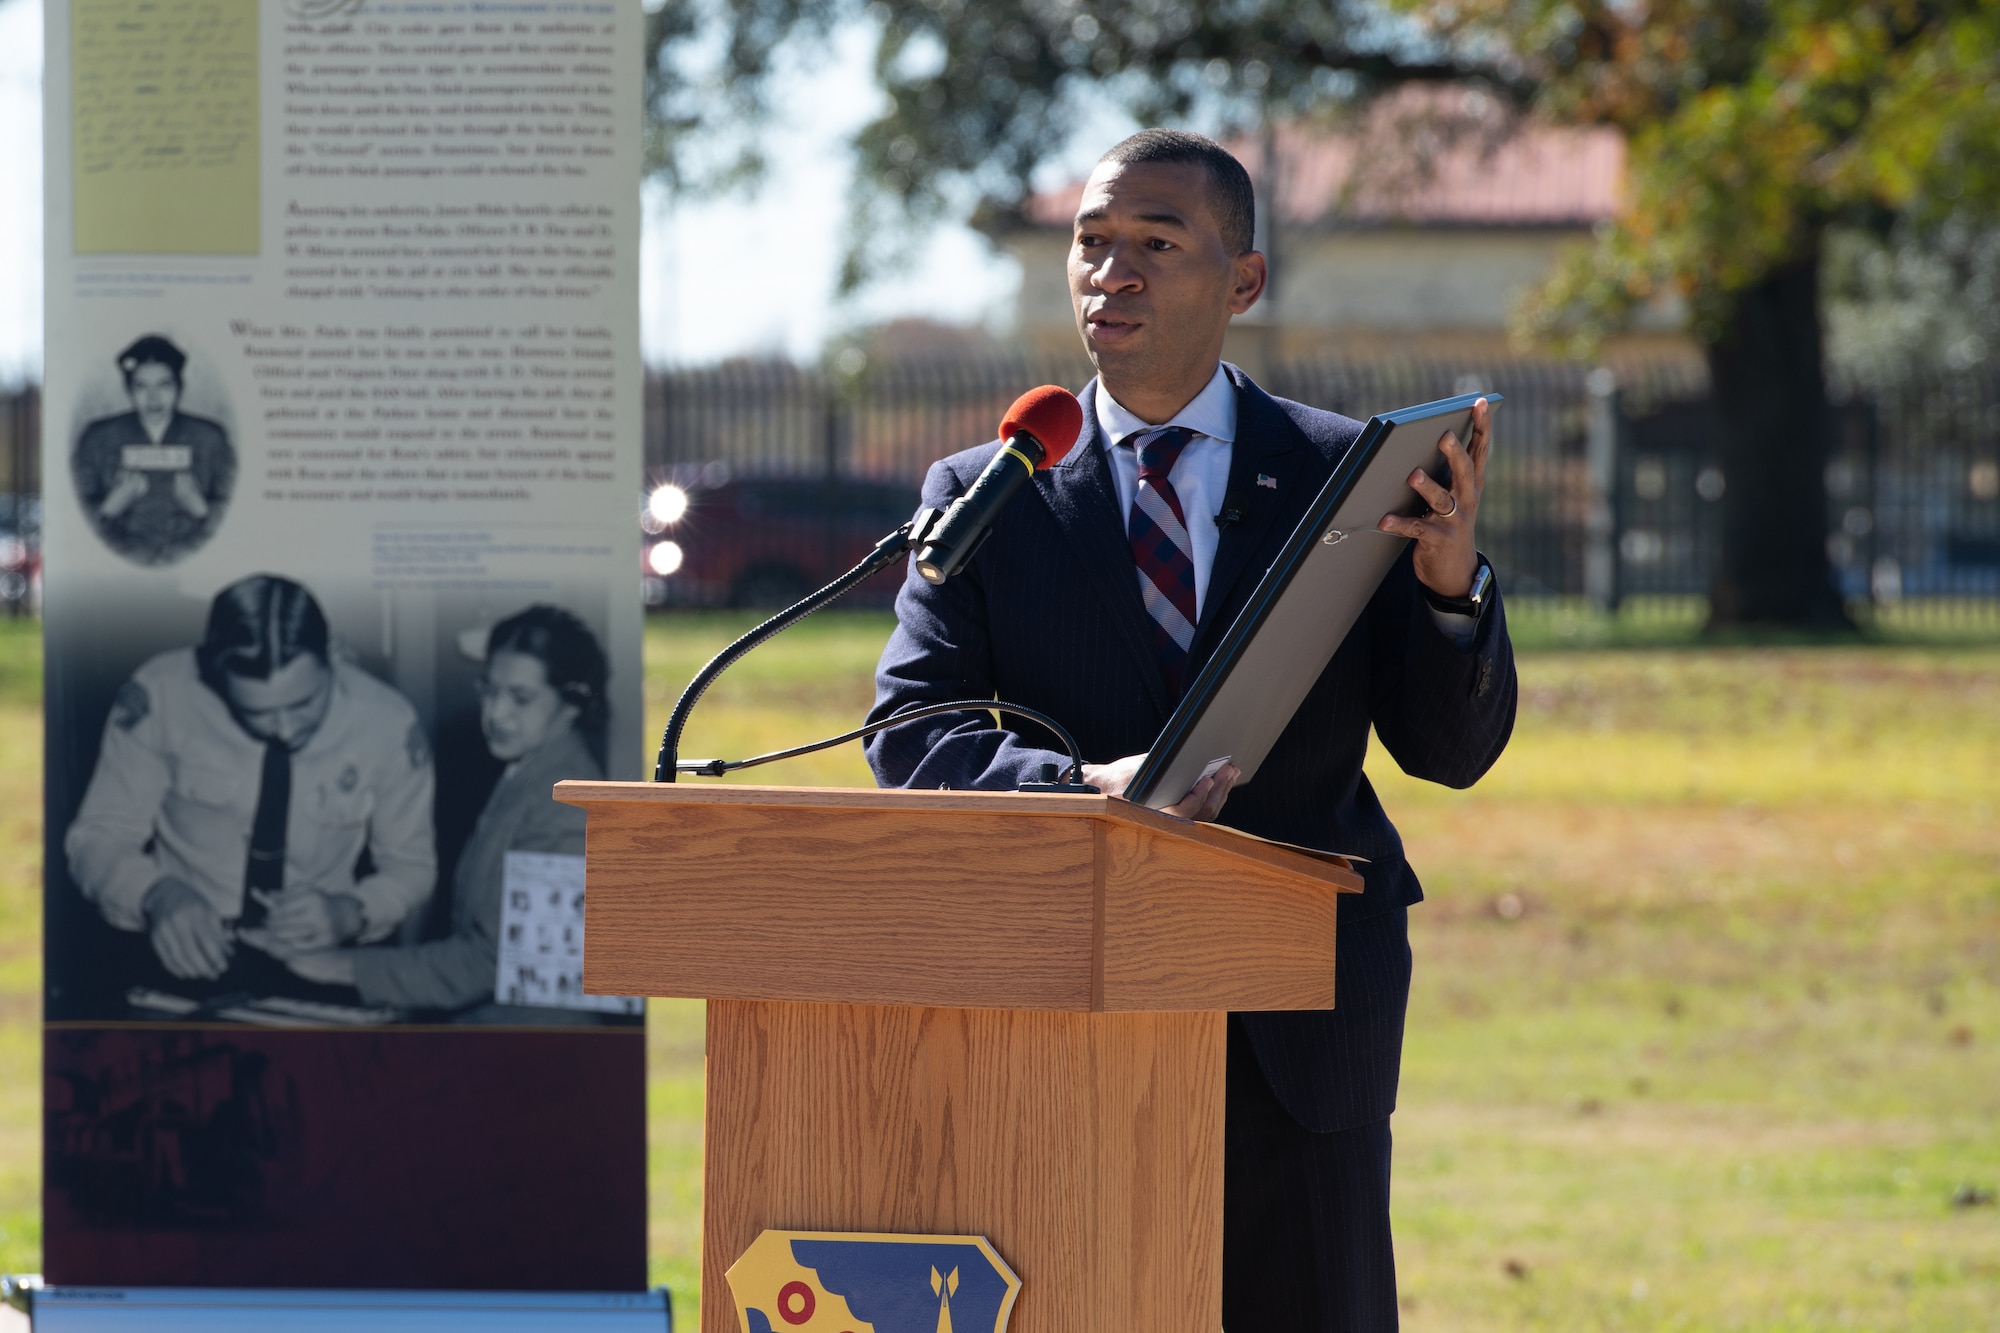 The Mayor of Montgomery Steven Reed speaks during a memorialization ceremony in honor of Rosa Parks on the 65th Anniversary of her refusal to give up her seat on a Montgomery Bus Dec. 1, 2020, on Maxwell Air Force Base, Alabama. A few of the other distinguished visitors in attendance were the Secretary of the Air Force Barbara Barrett, Bryan Stevenson, Equal Justice Initiative director and Lt. Gen. Brad Webb, Air Education and Training Command commander, who watched the event via live stream. (U.S. Air Force photo by Senior Airman Charles Welty)